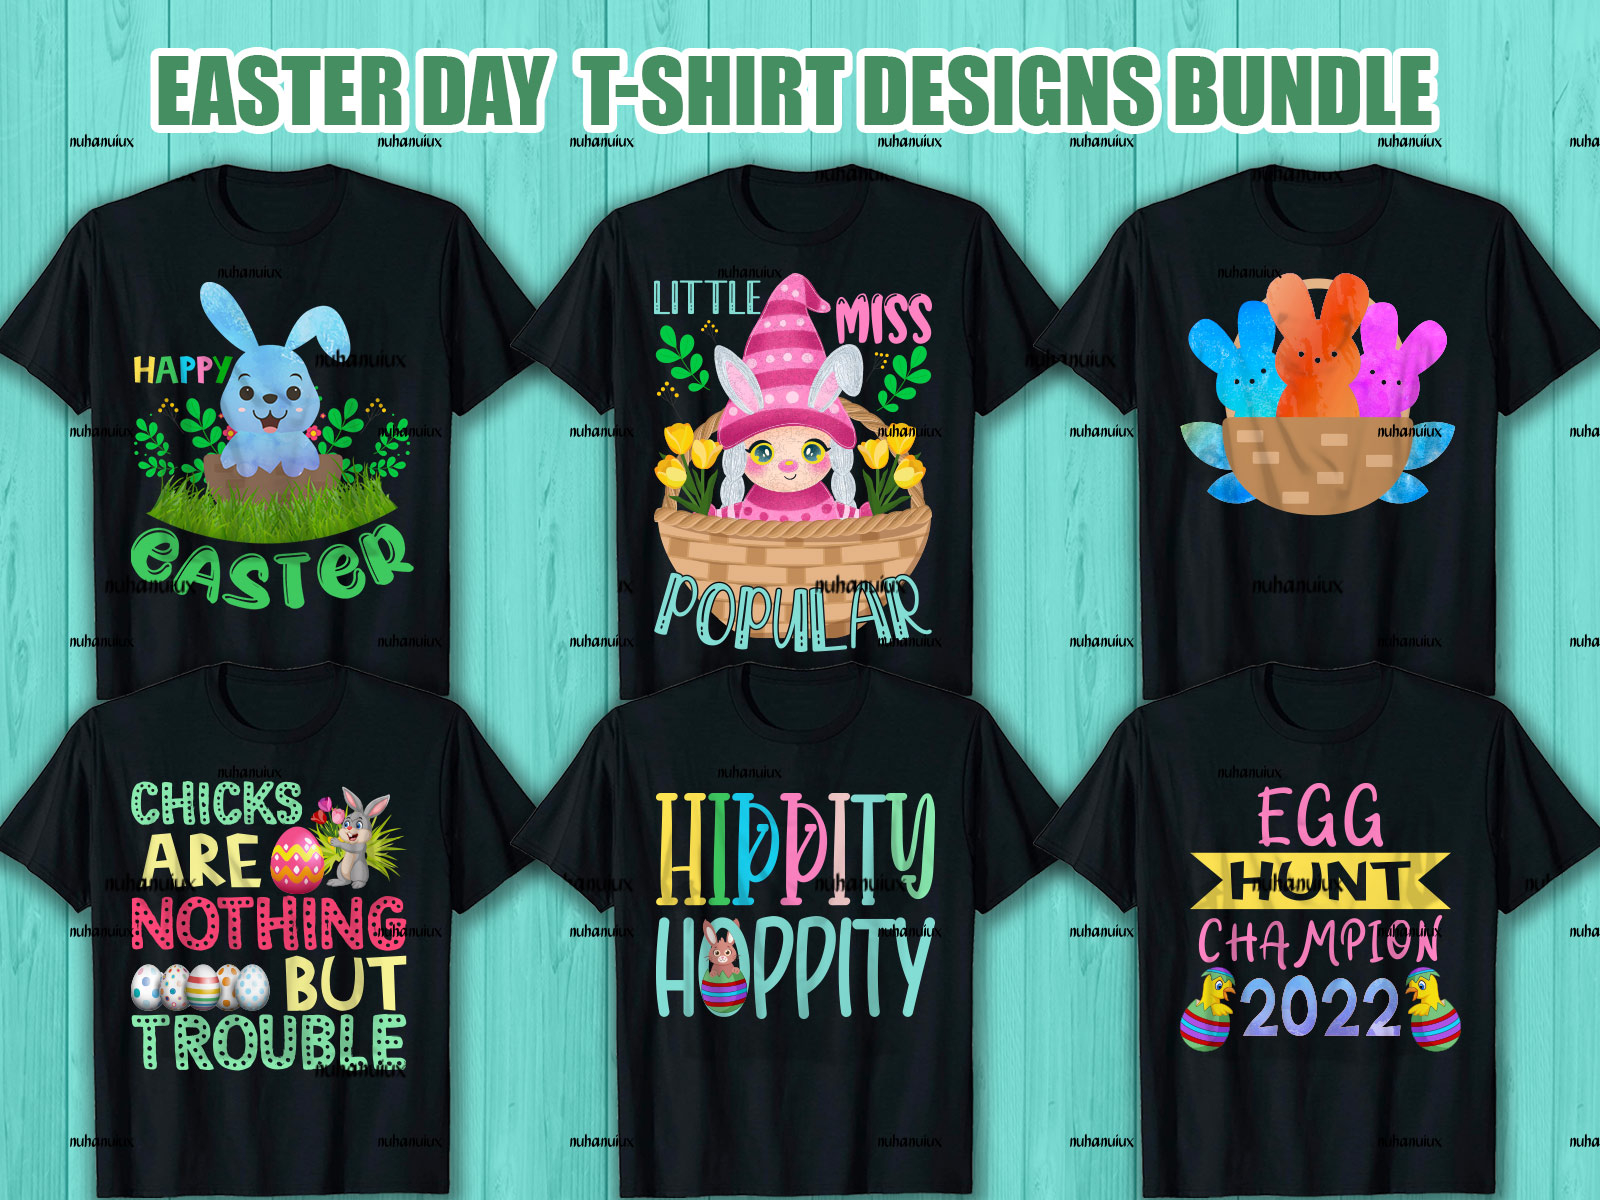 This is Easter Day T-Shirt Designs Bundle. by Mahmud Hasan on Dribbble